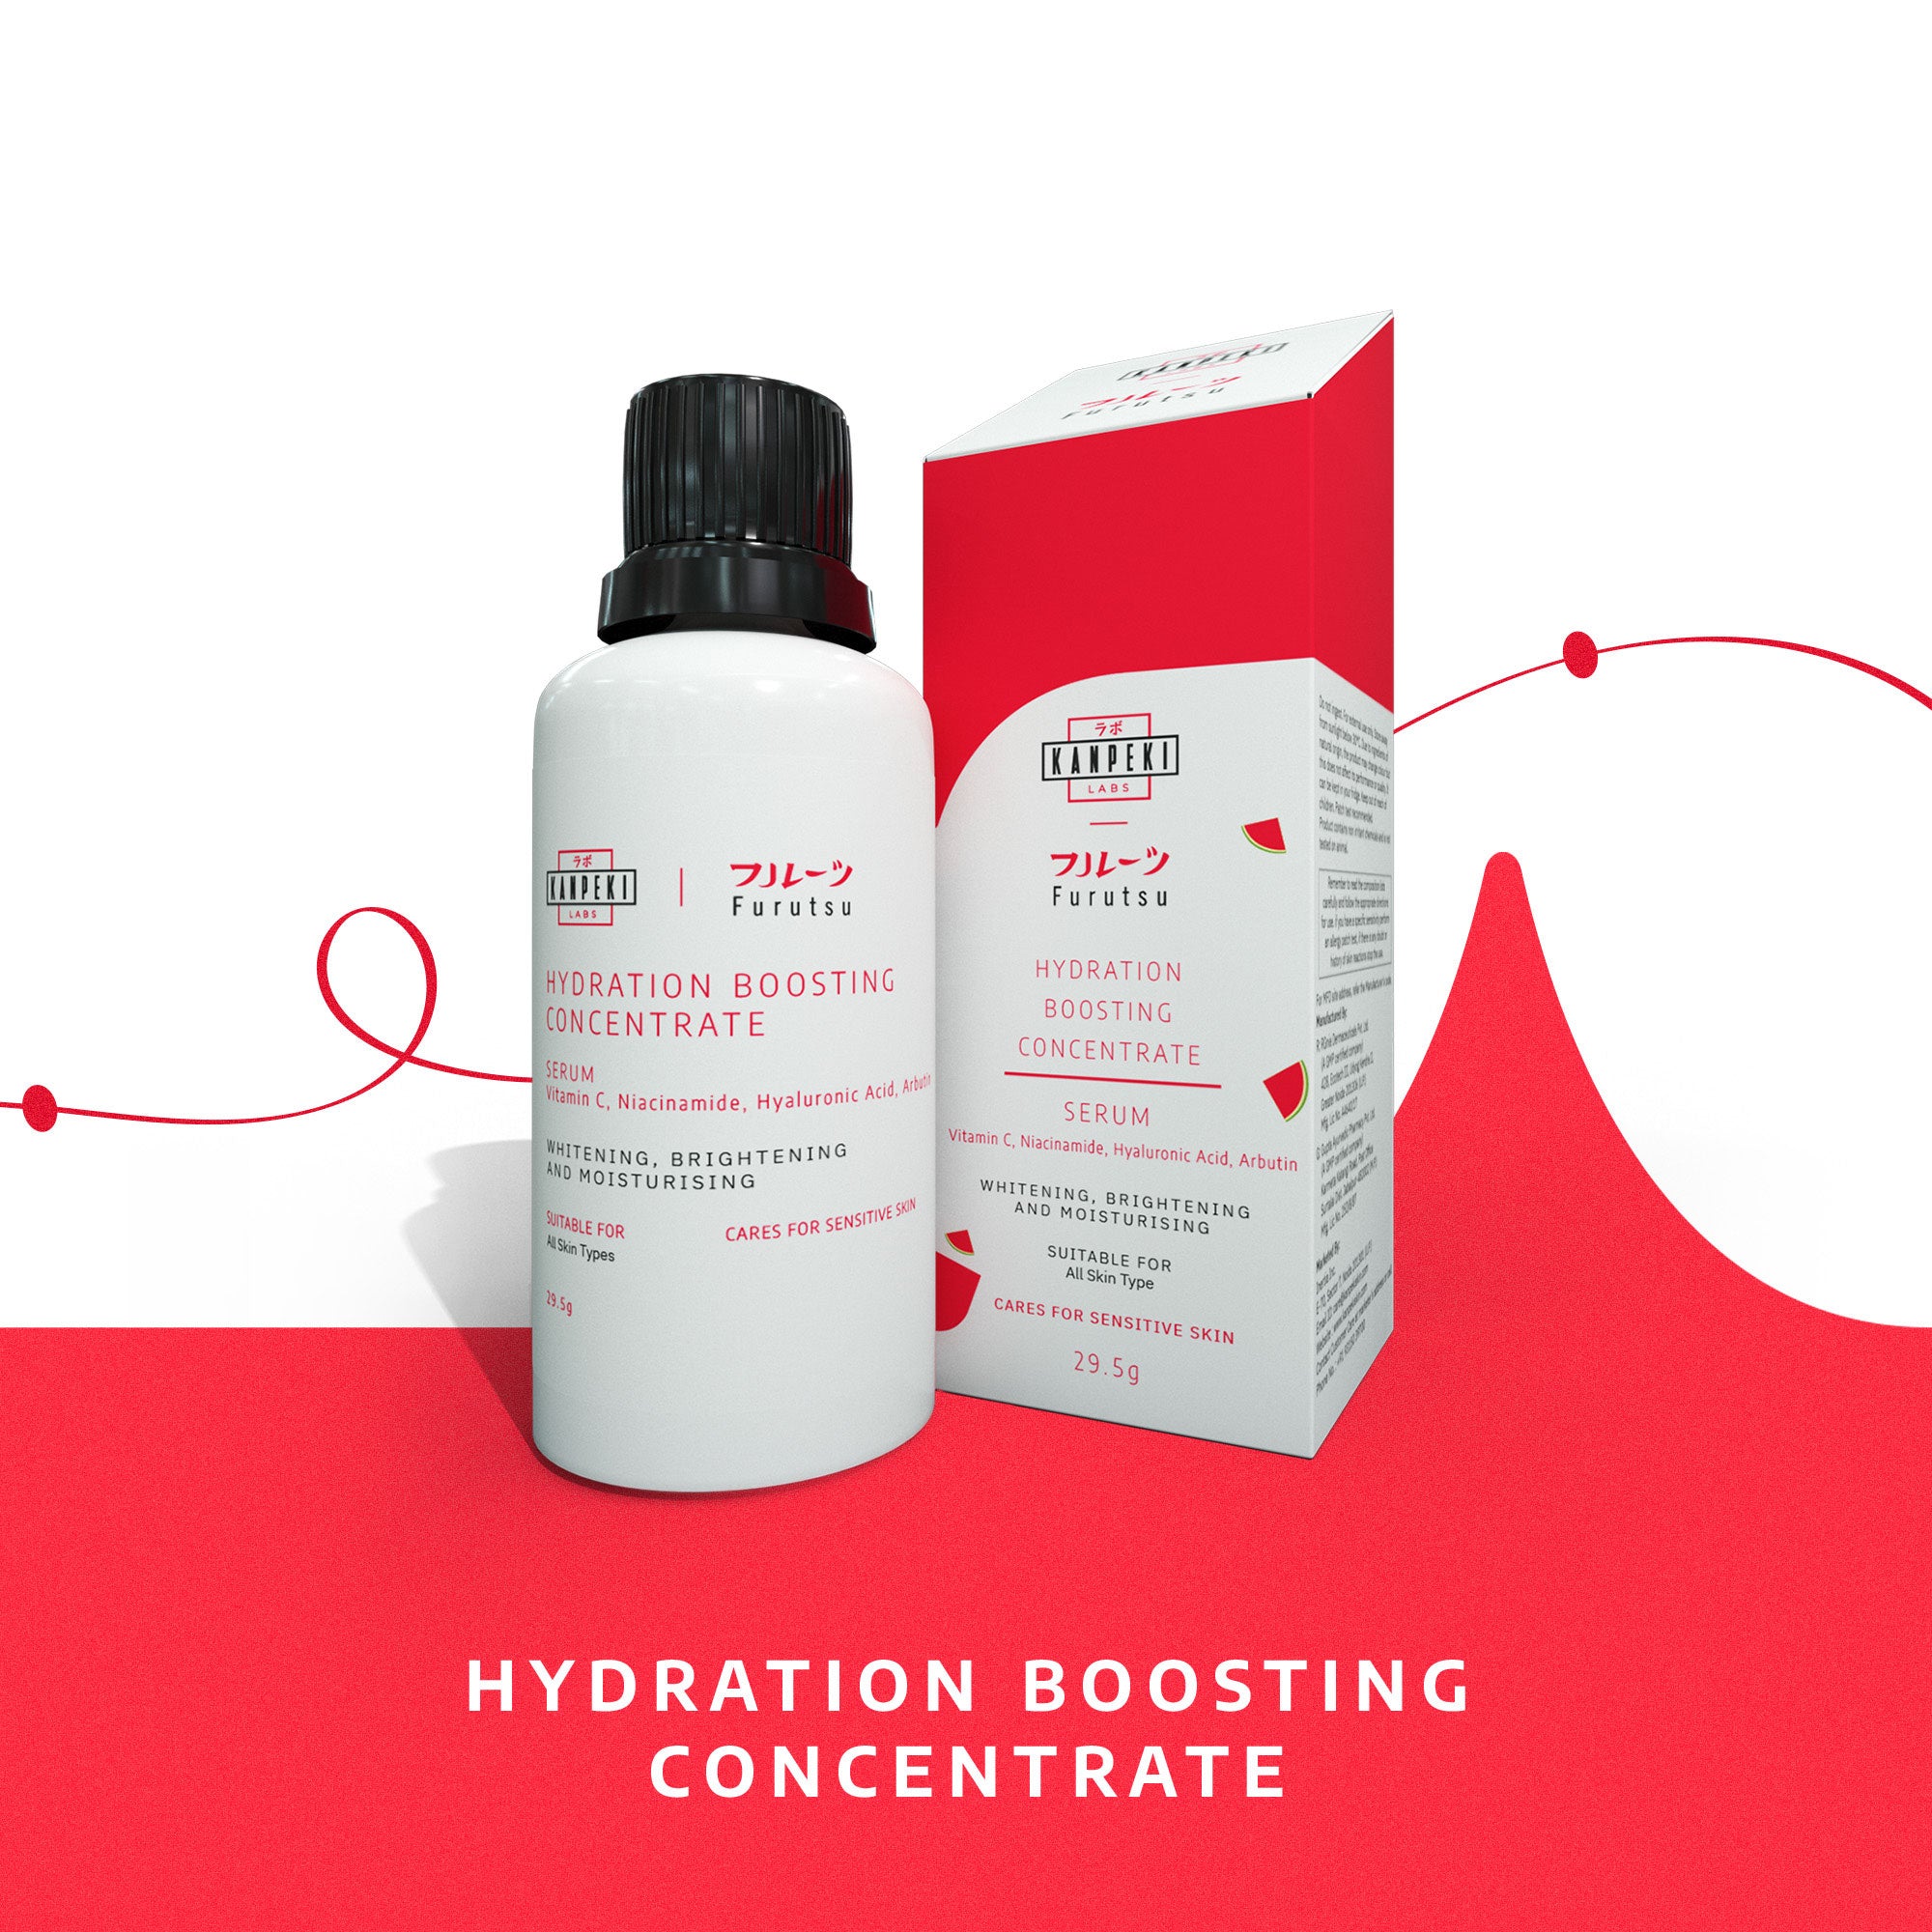 Hydration Boosting Concentrate